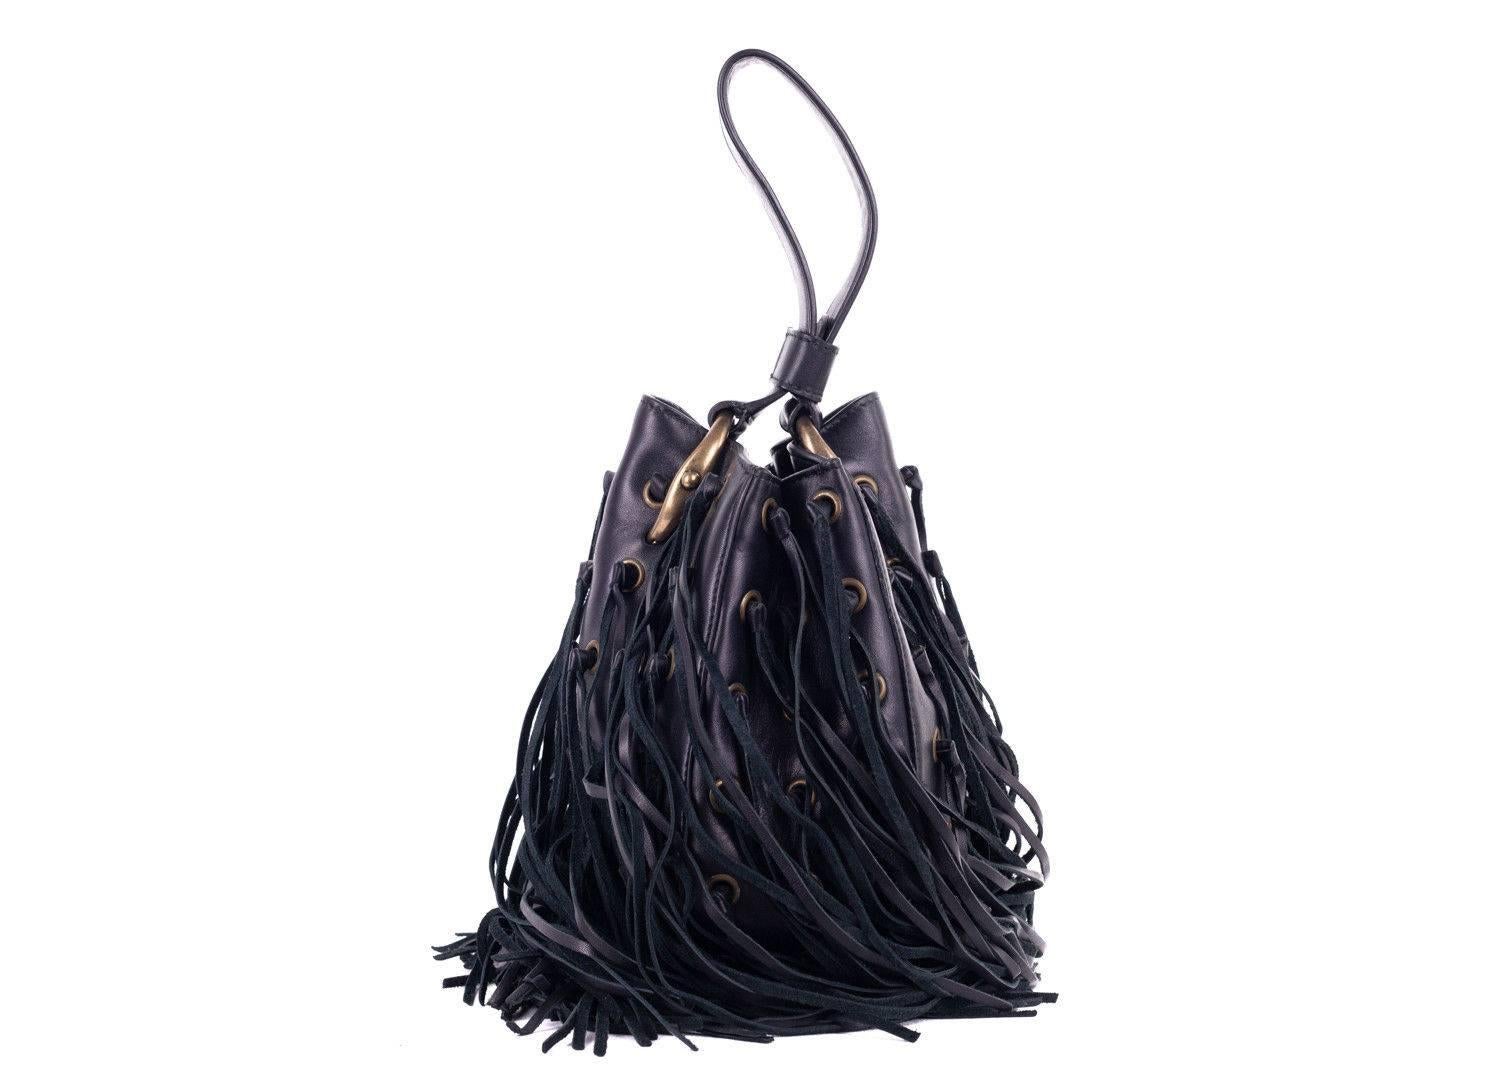 Roberto Cavalli Black Leather Eyelet Fringe Wristlet Bucket Bag In New Condition For Sale In Brooklyn, NY